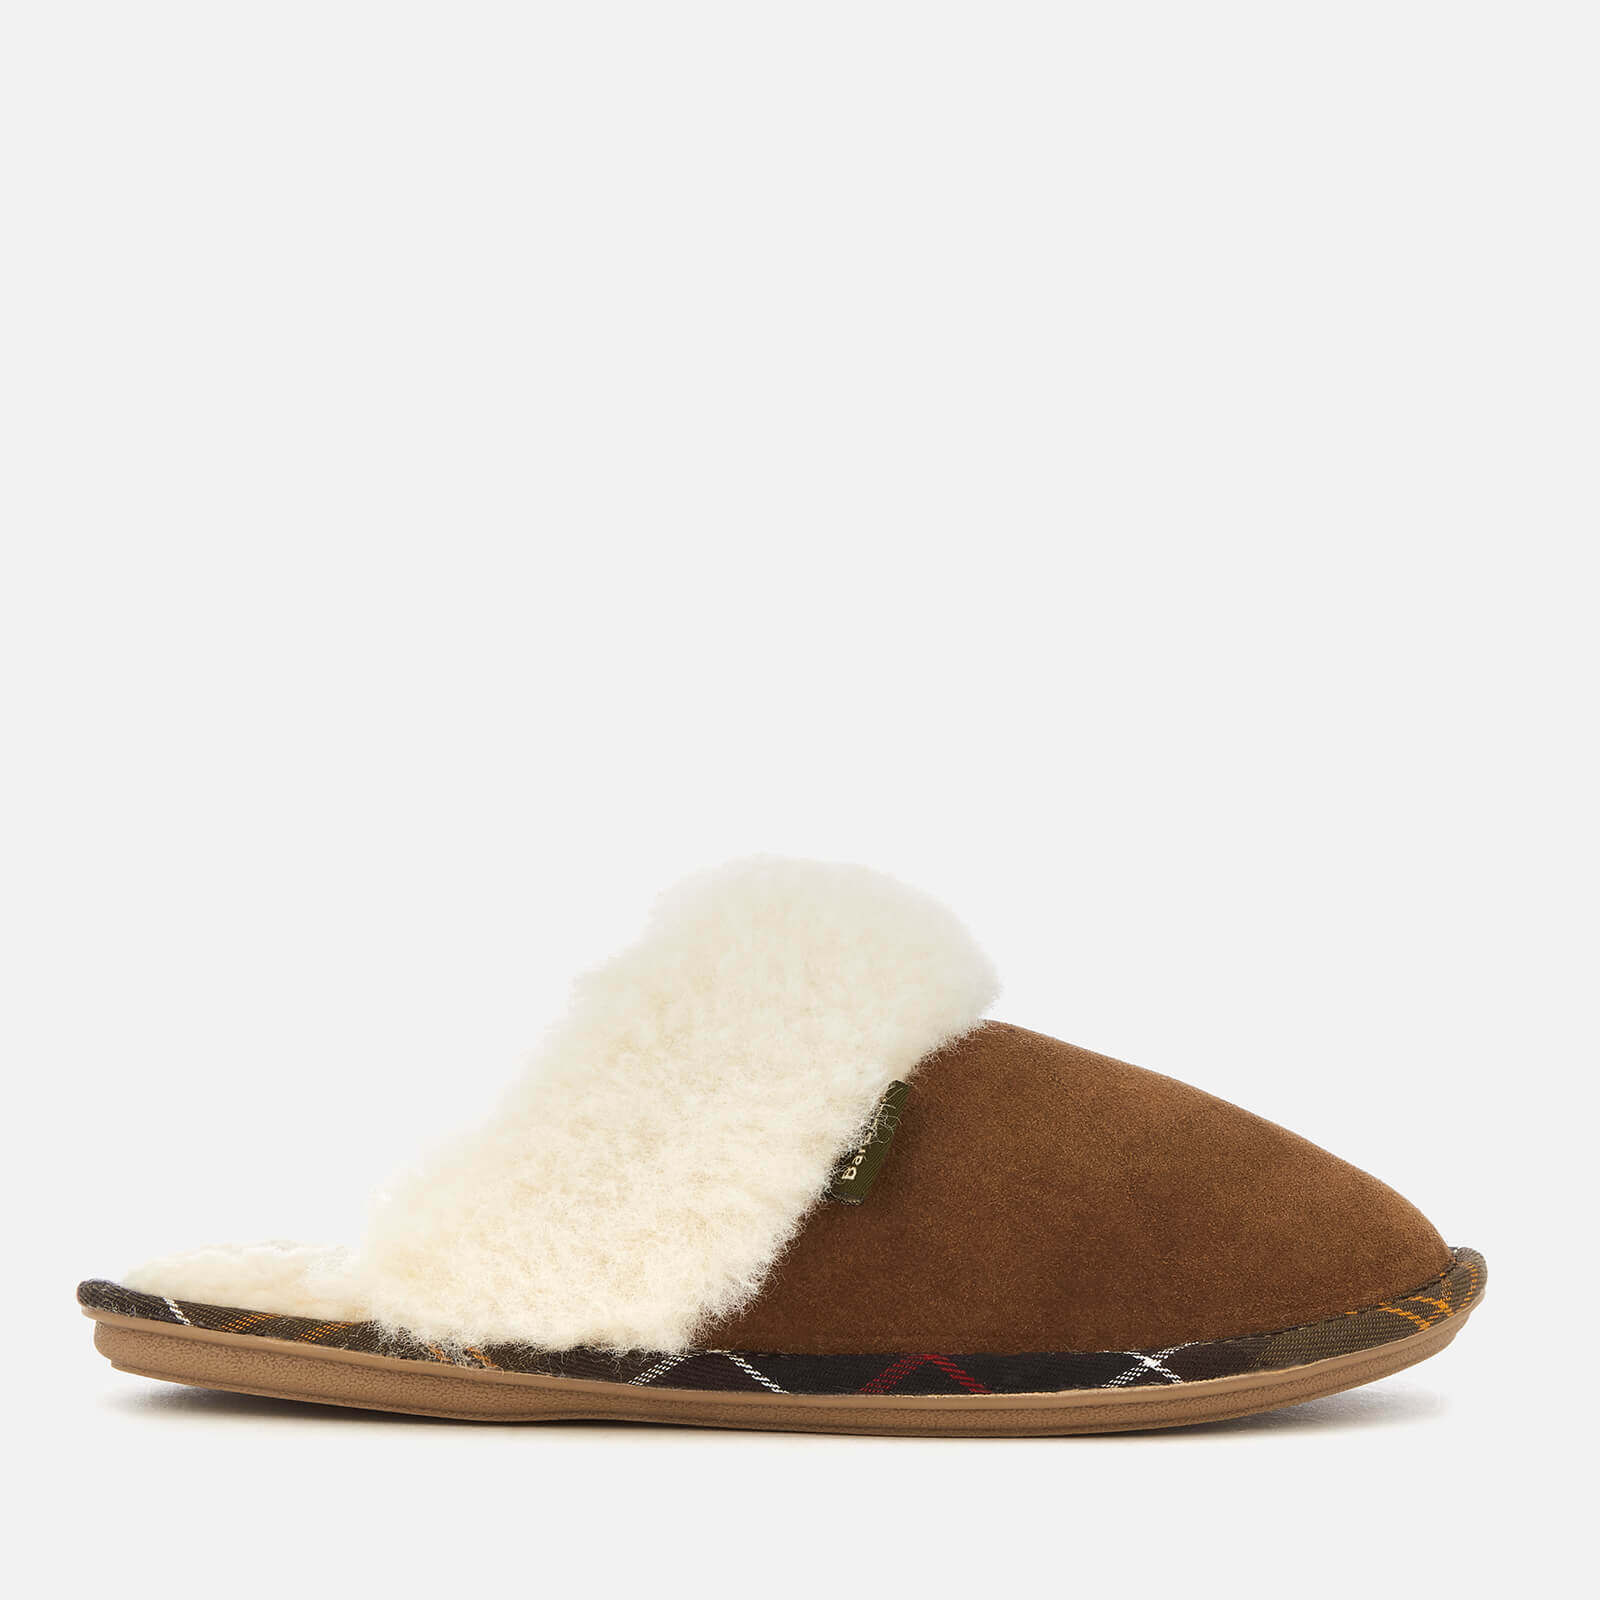 Barbour Women’s Lydia Suede Mule Slippers - Camel